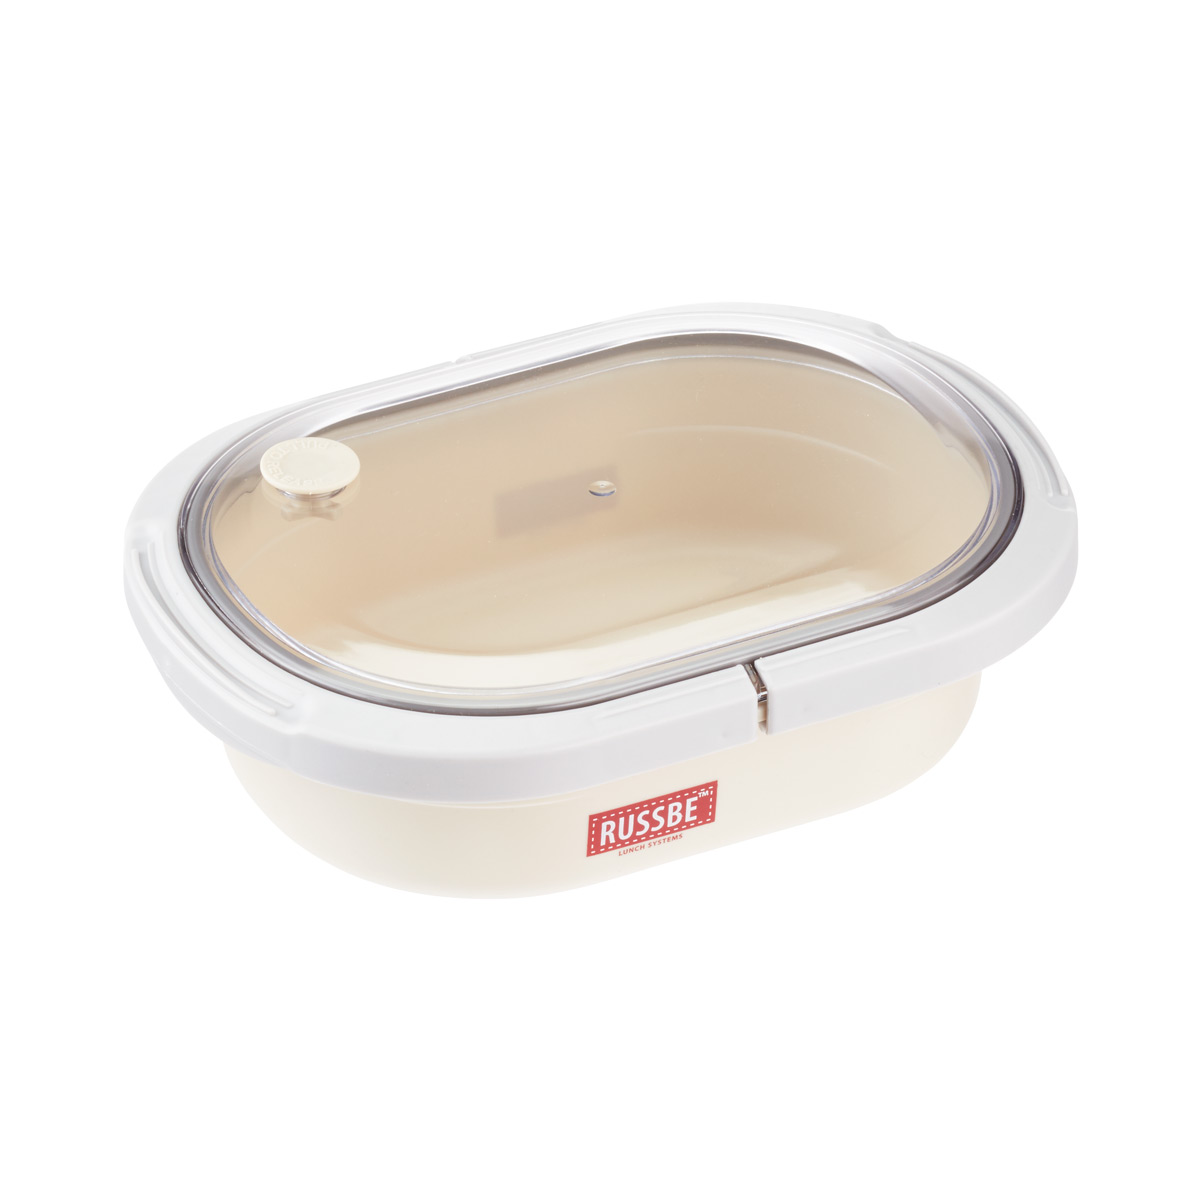 https://www.containerstore.com/catalogimages/329954/10073255-bento-box-oval-27oz-bone-wh.jpg